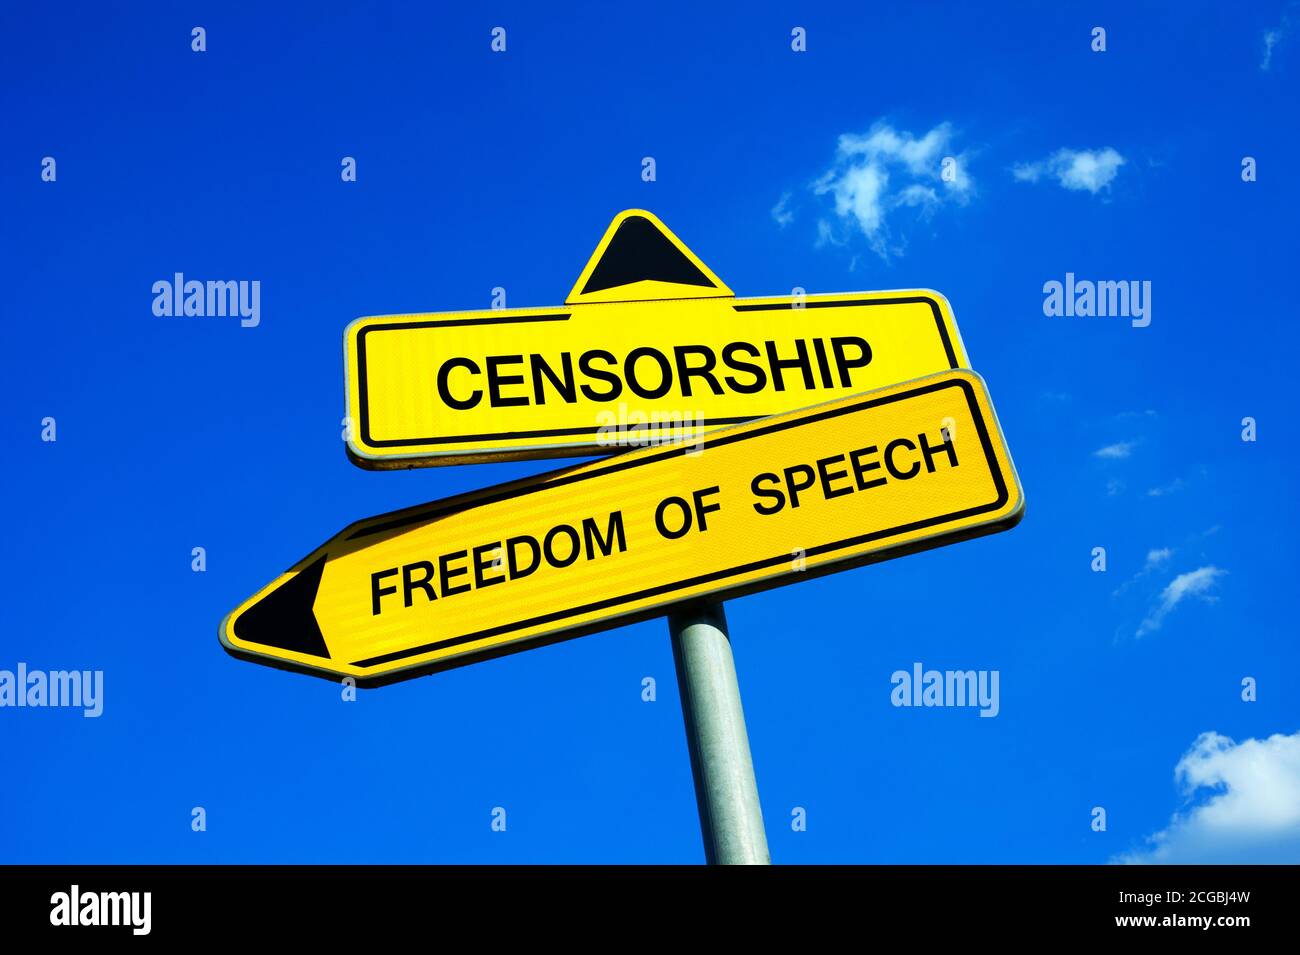 Censorship or Freedom of Speech - Traffic sign with two options - appeal to fight for possibility to express opinion and truth. Stock Photo